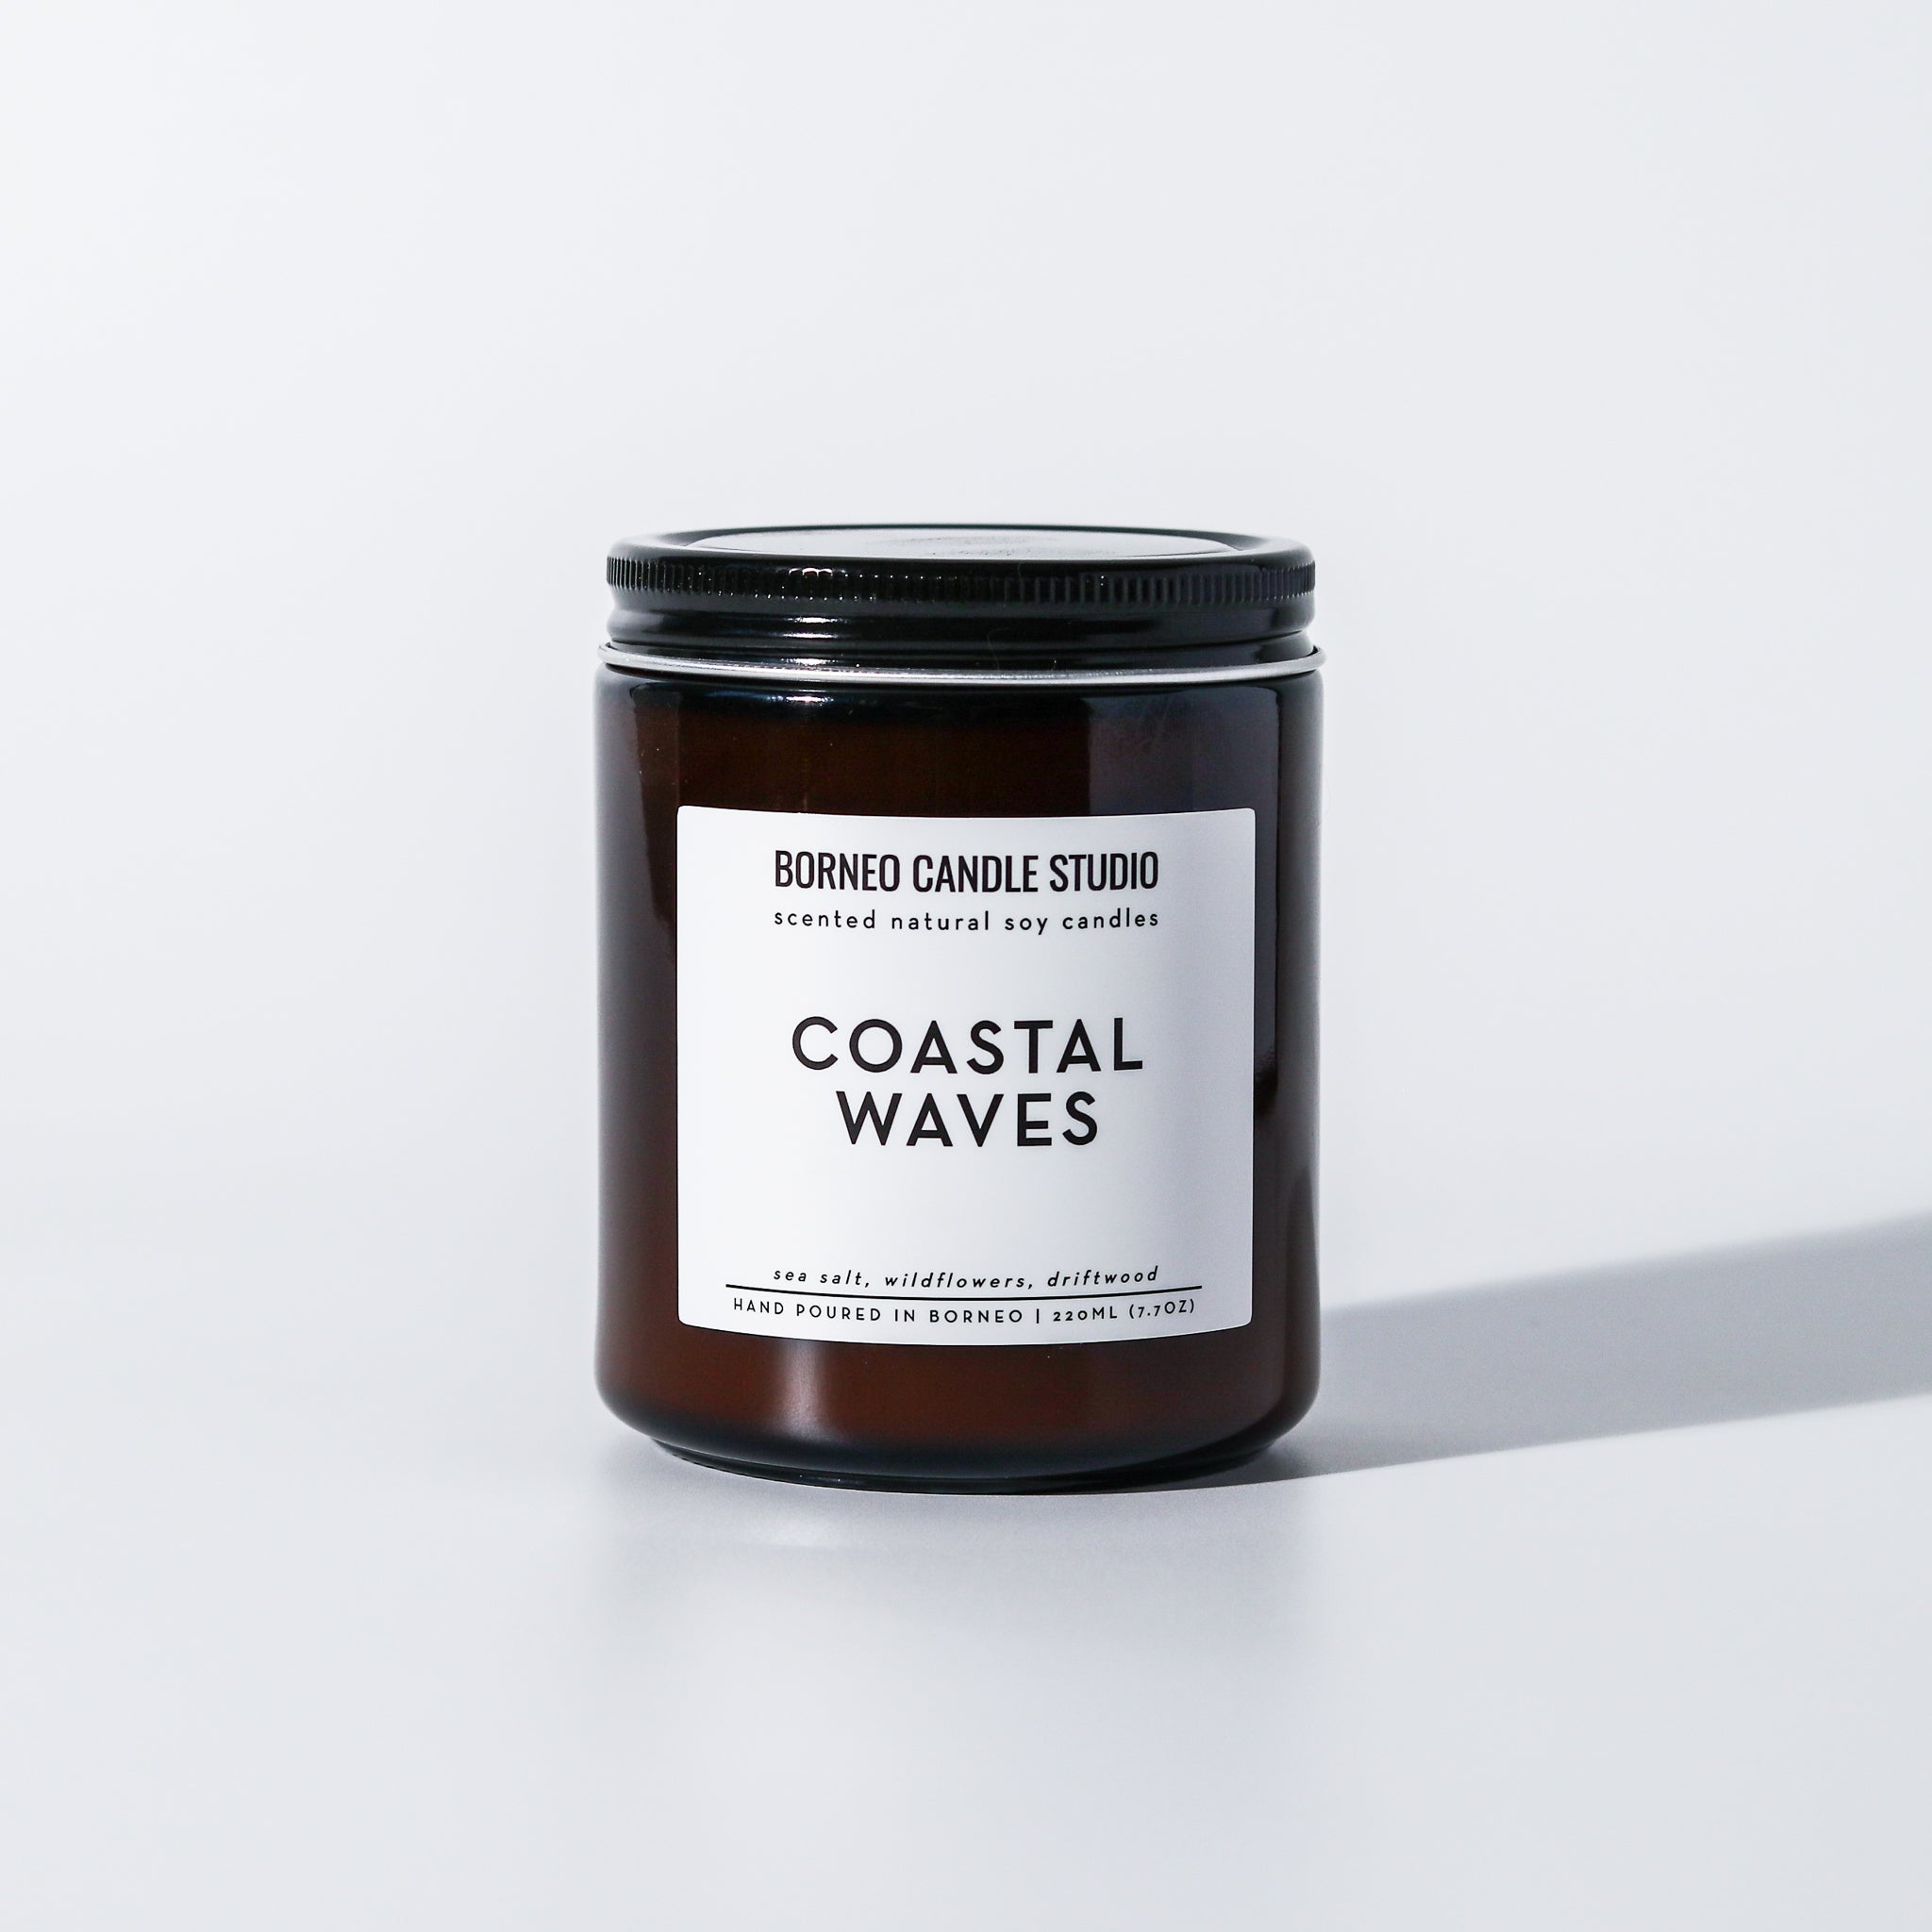 Coastal Waves Soy Candle - sea salt, wildflowers, driftwood scented candle in 7.7 oz amber glass jar with lid